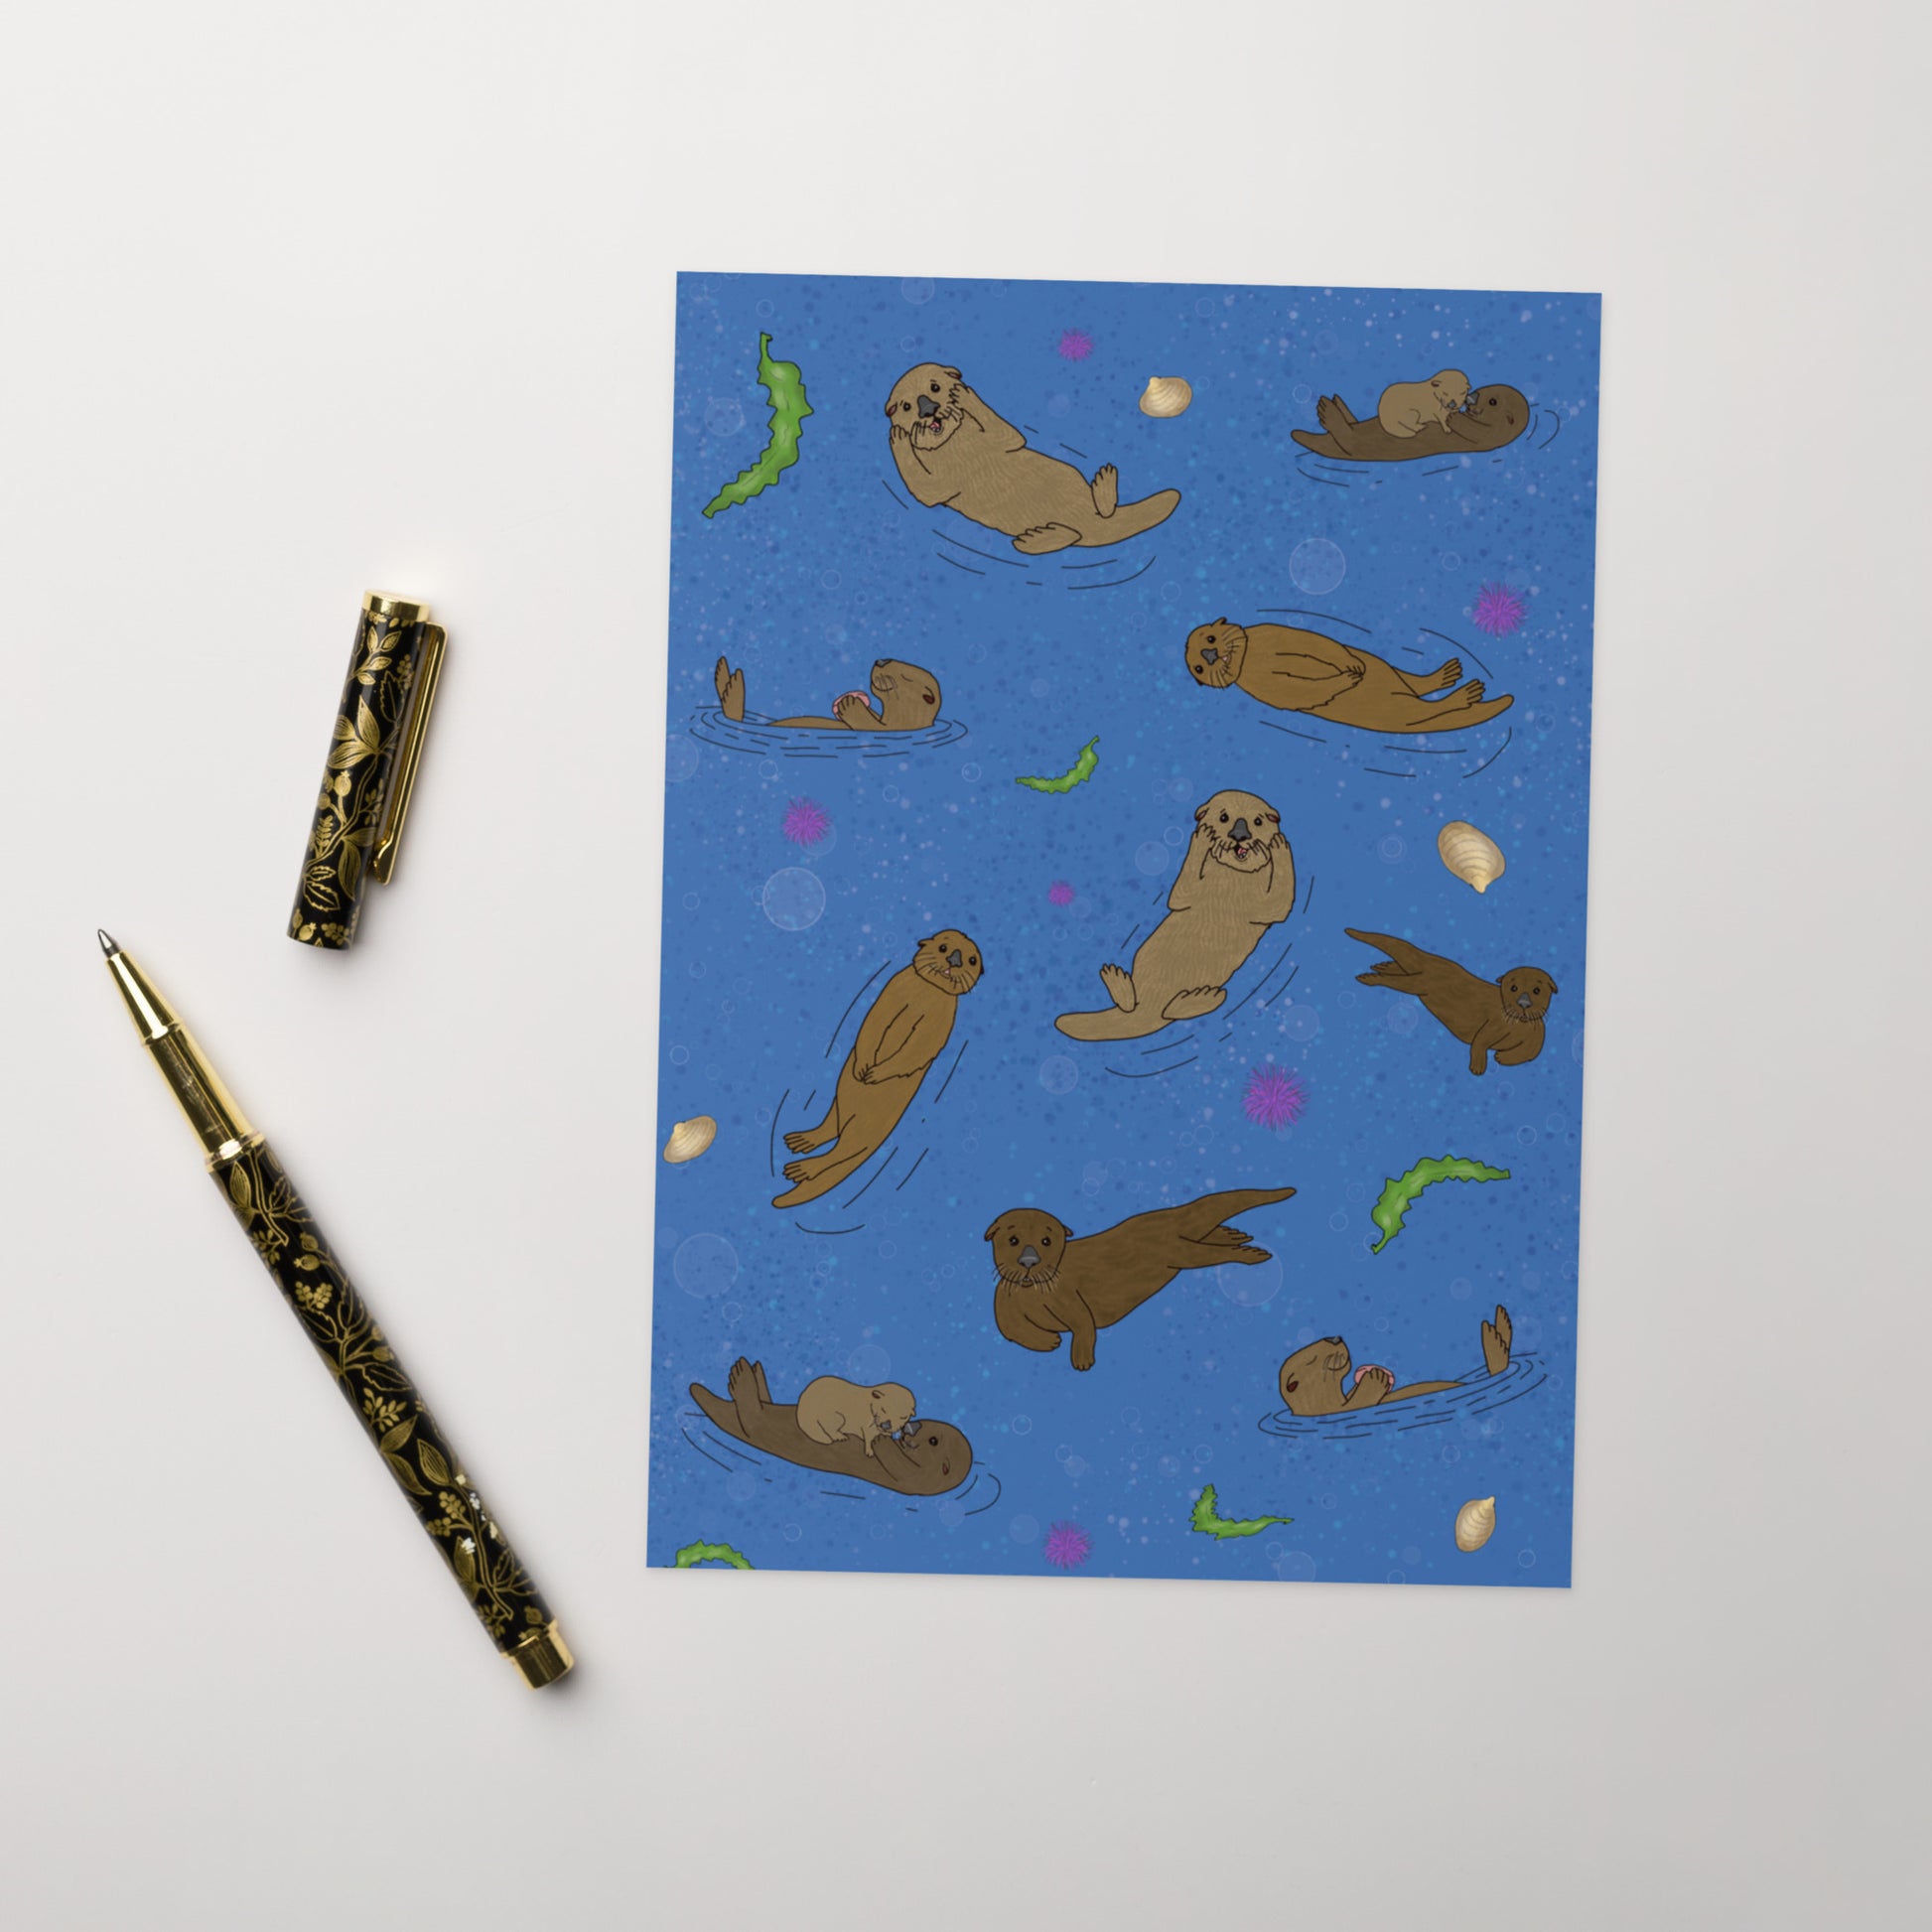 Pack of ten 5 x 7 inch greeting cards. Features illustrated sea otters on the front. Inside is blank. Made of coated paperboard. Comes with ten envelopes. Shown on tabletop by ballpoint pen.